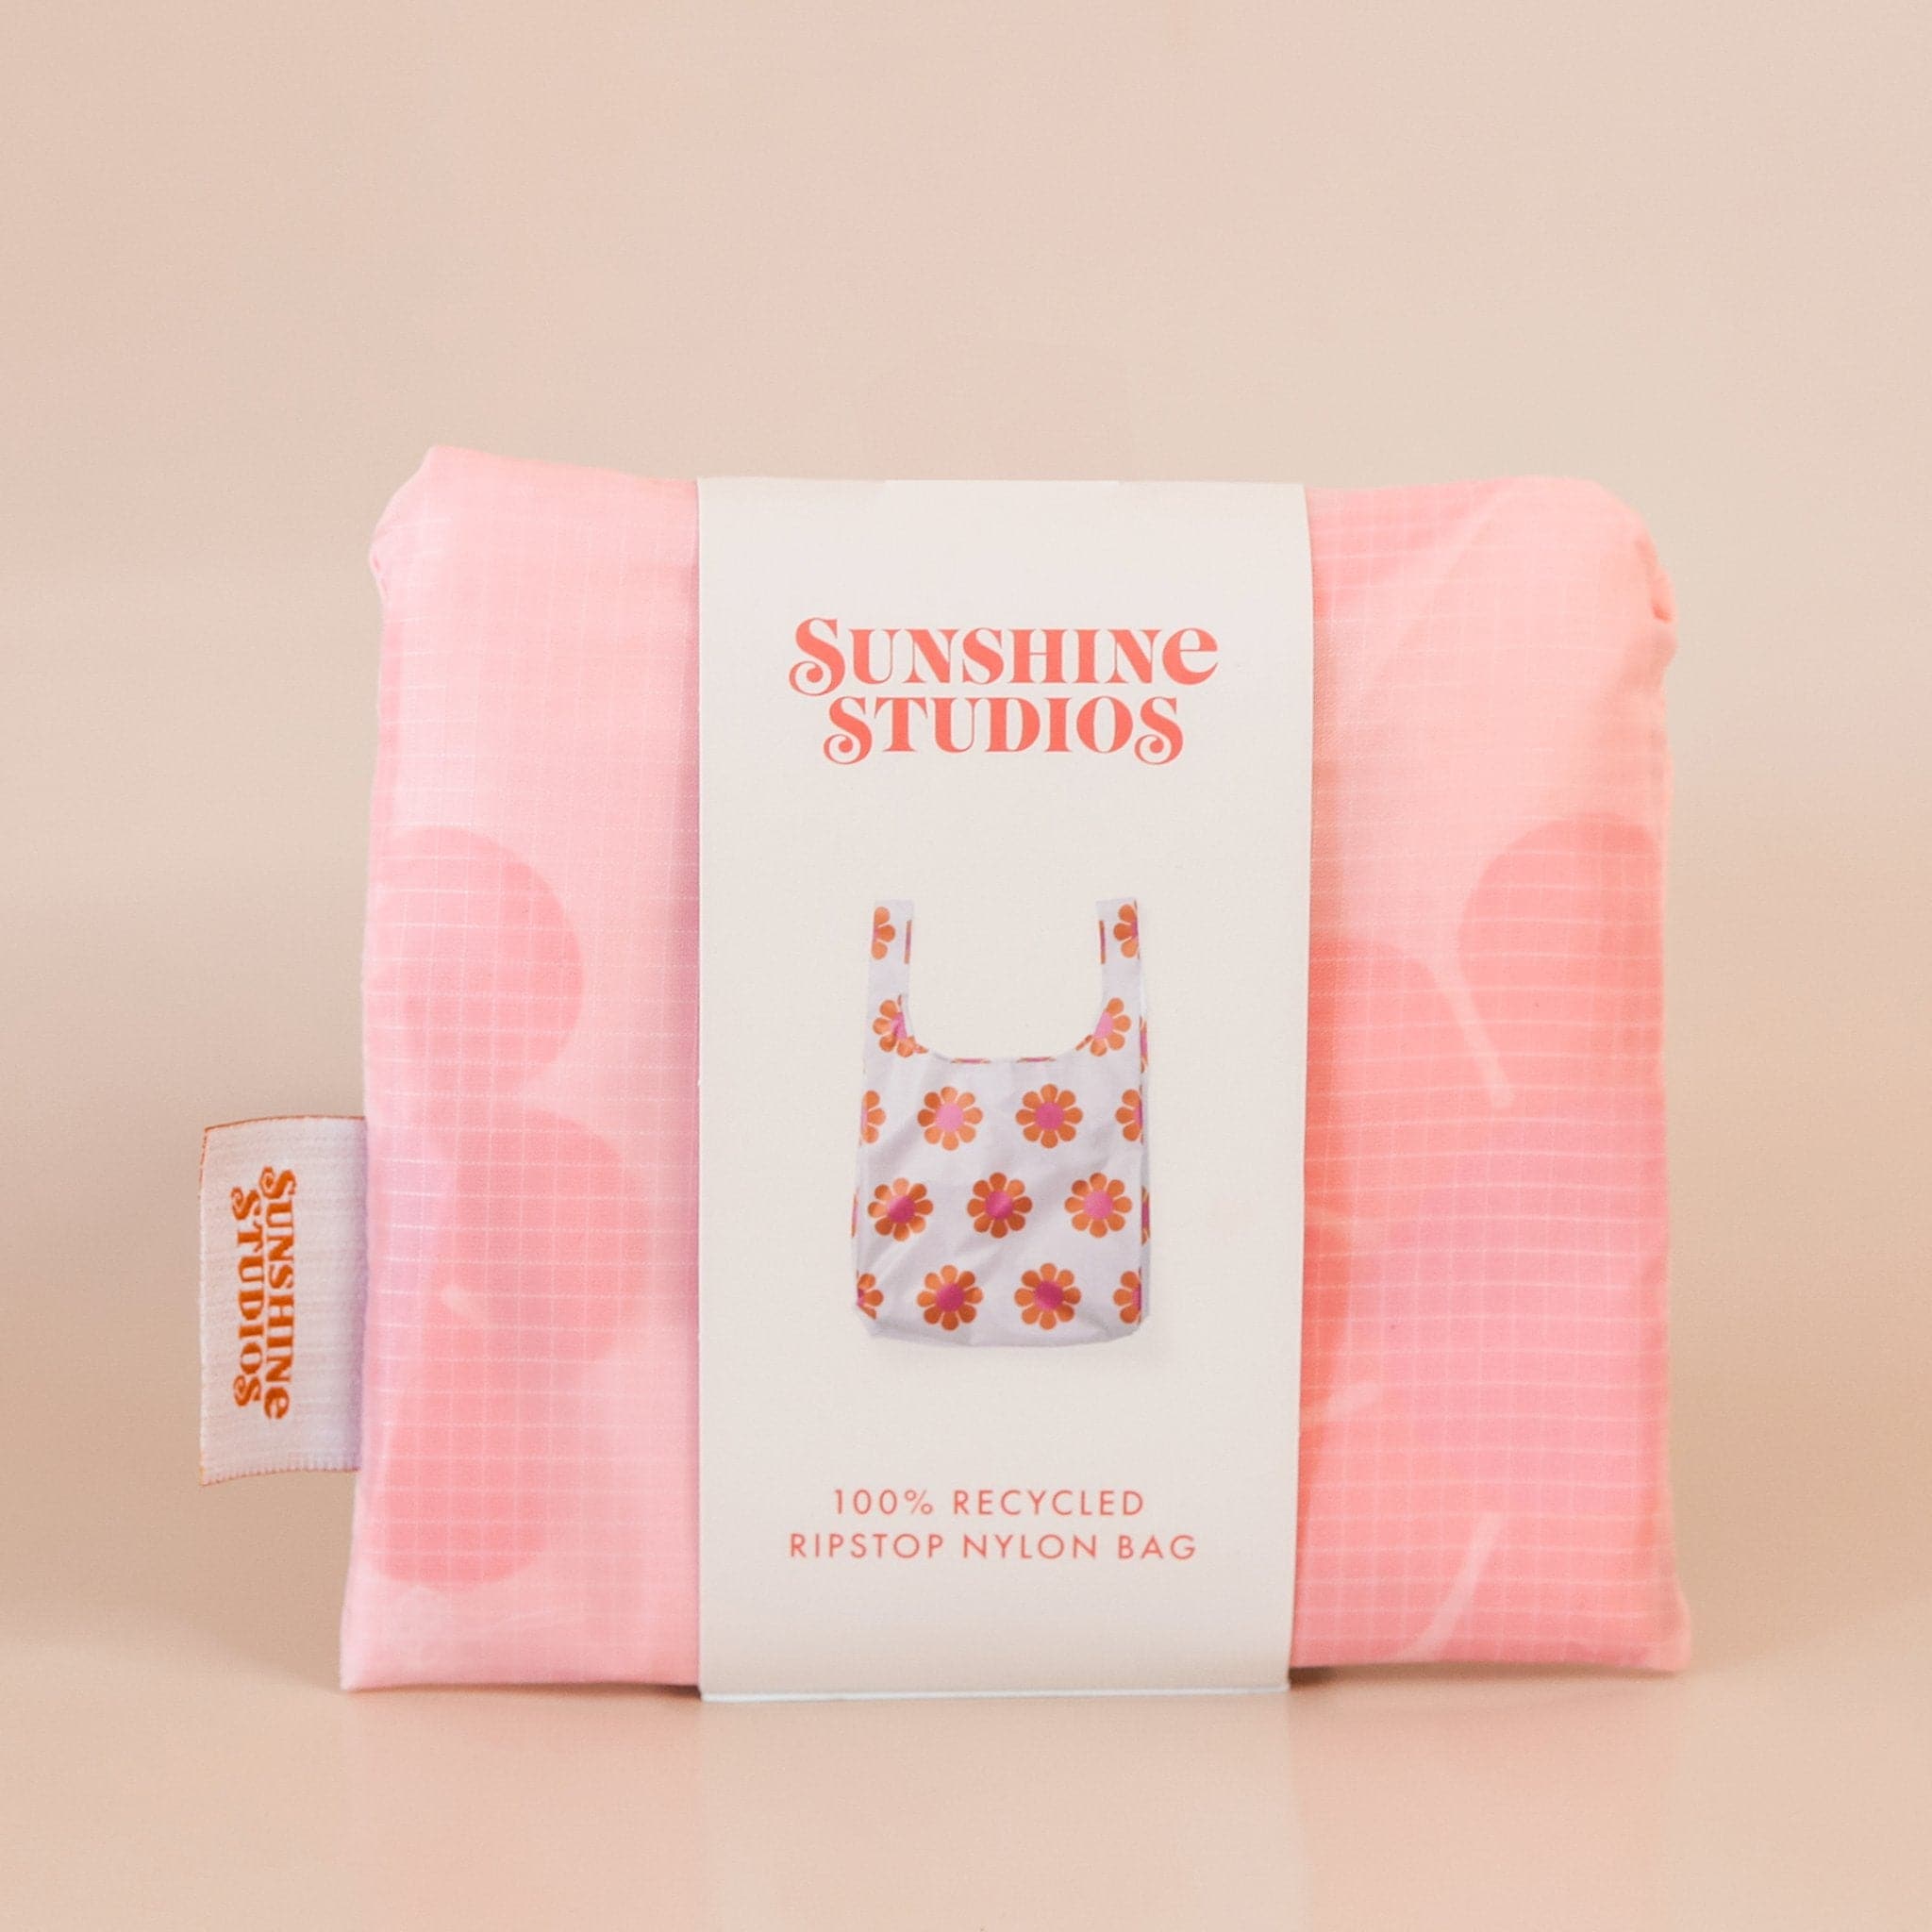 Soft pink reusable bag folded tightly into a square. The bag is wrapped in a white band that reads ’sunshine studios&#39;. Under the text is a picture of the reusable bag. On the left side of the bag is a white tag with bright orange text that reads ’sunshine studios.&#39;